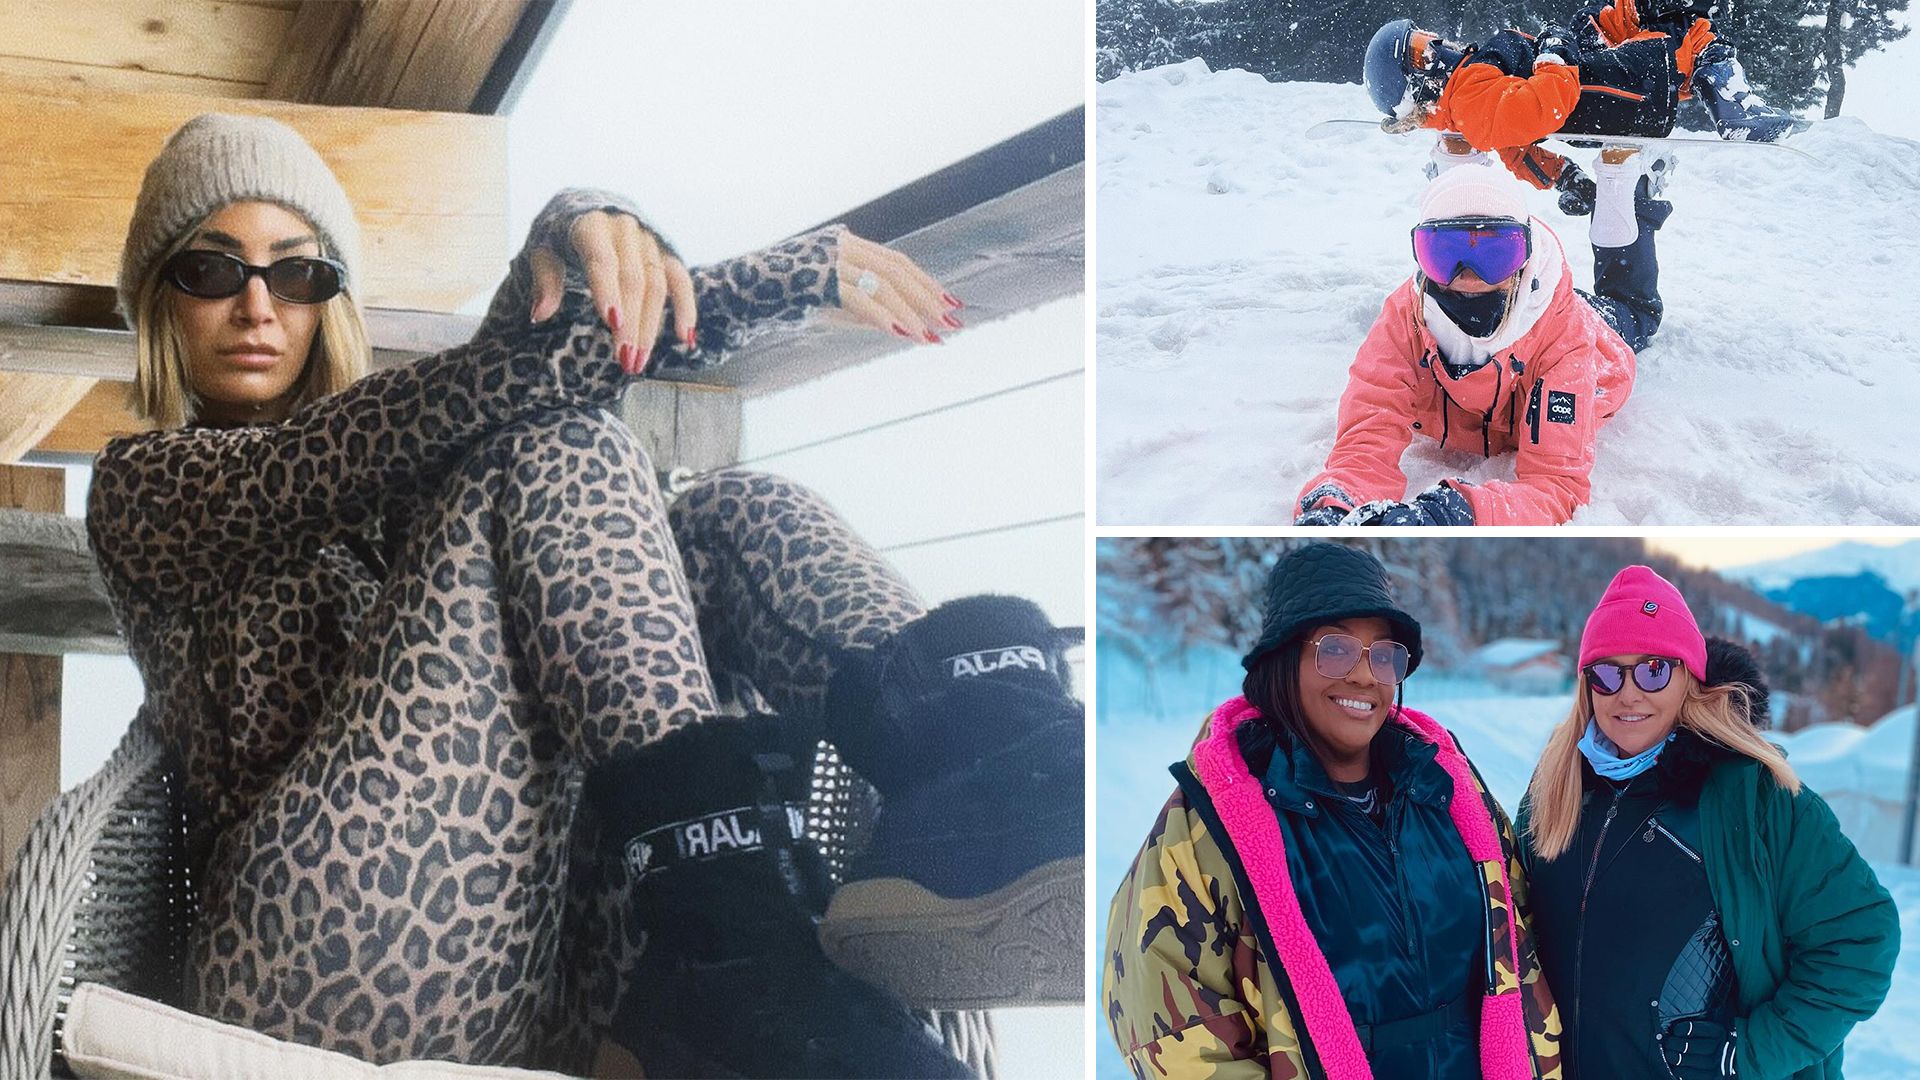 Turn Heads On The Slopes This Winter With These Chic Ski Fashion